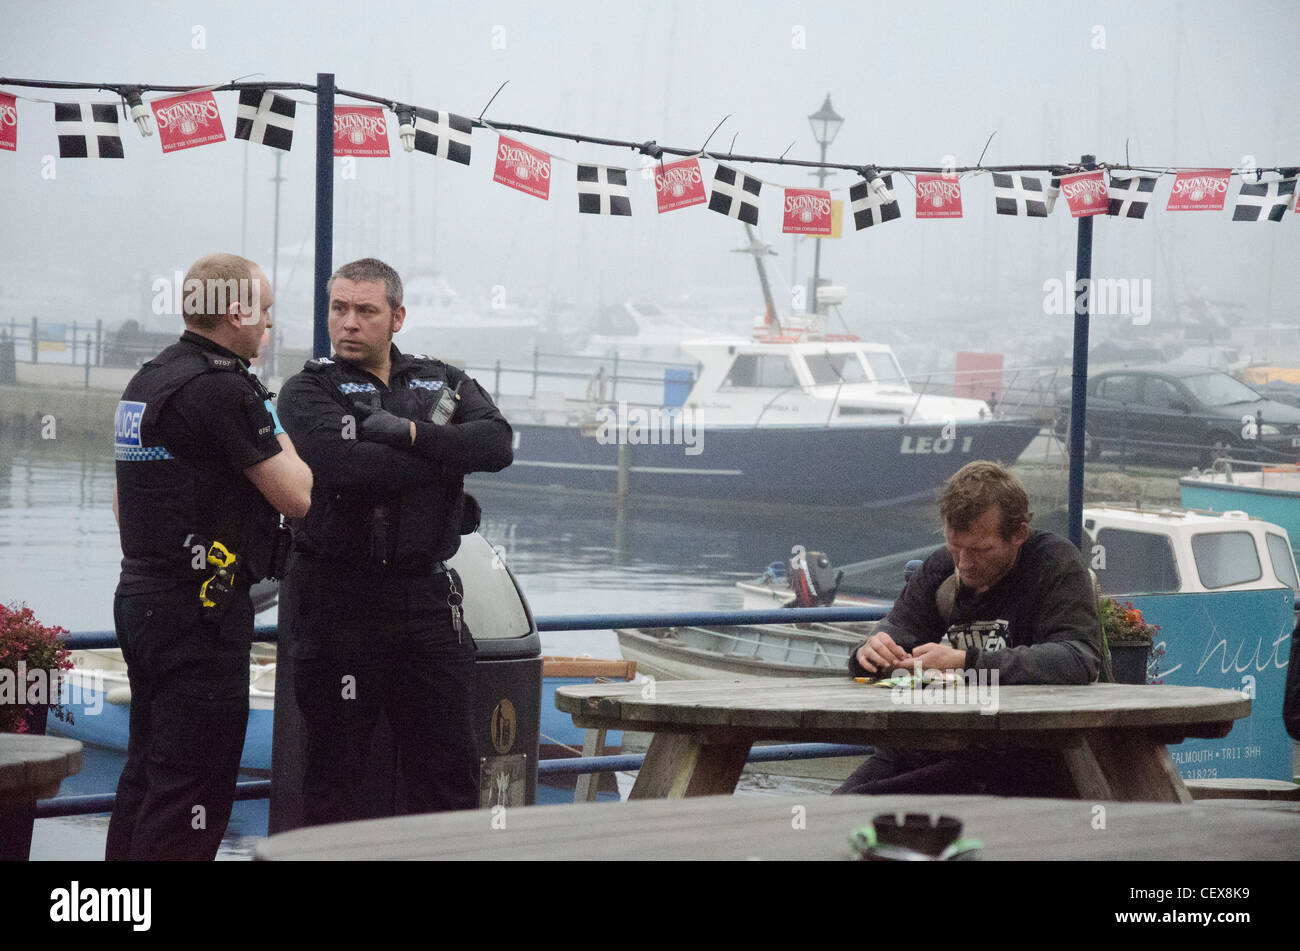 Police keep watch after being called for a disturbance at the chainlocker pub in Falmouth, Cornwall Stock Photo